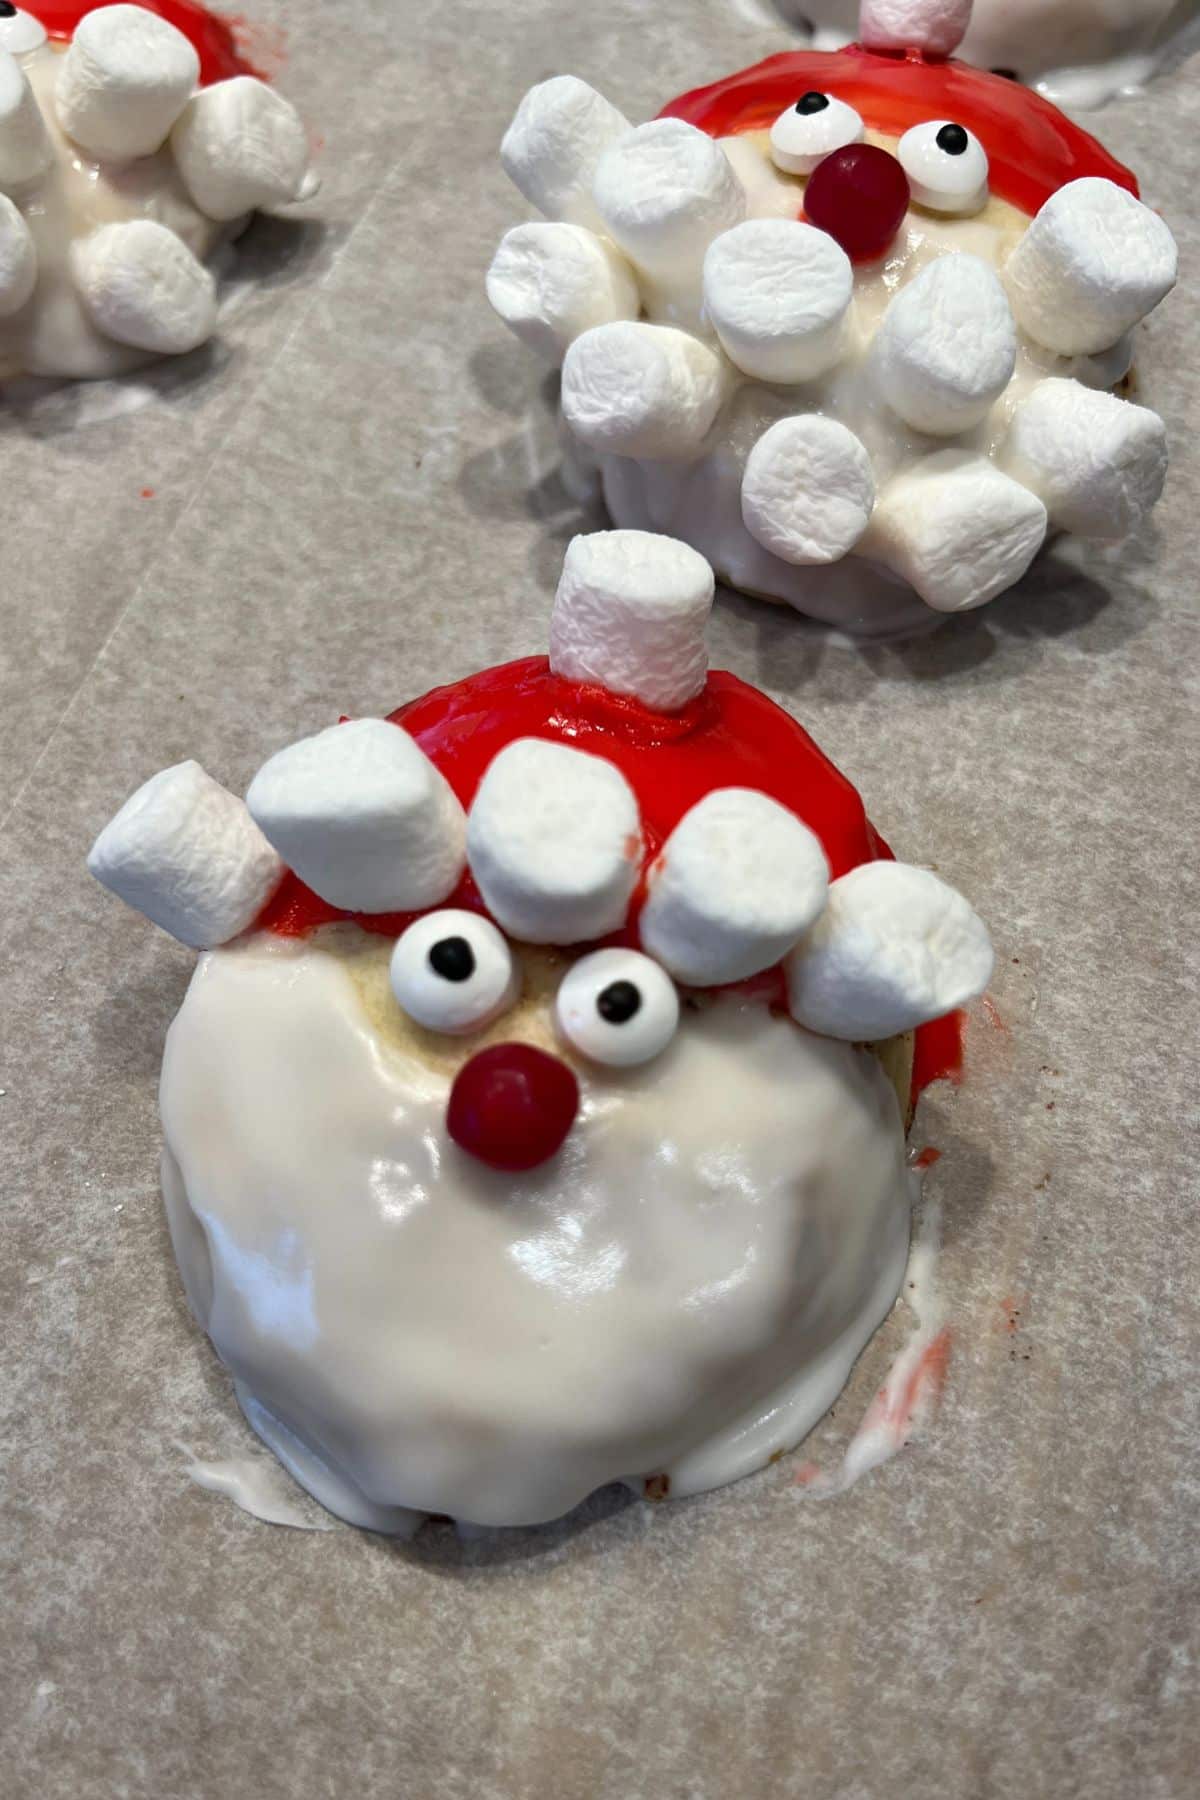 cinnamon roll decorated like Santa with red hat